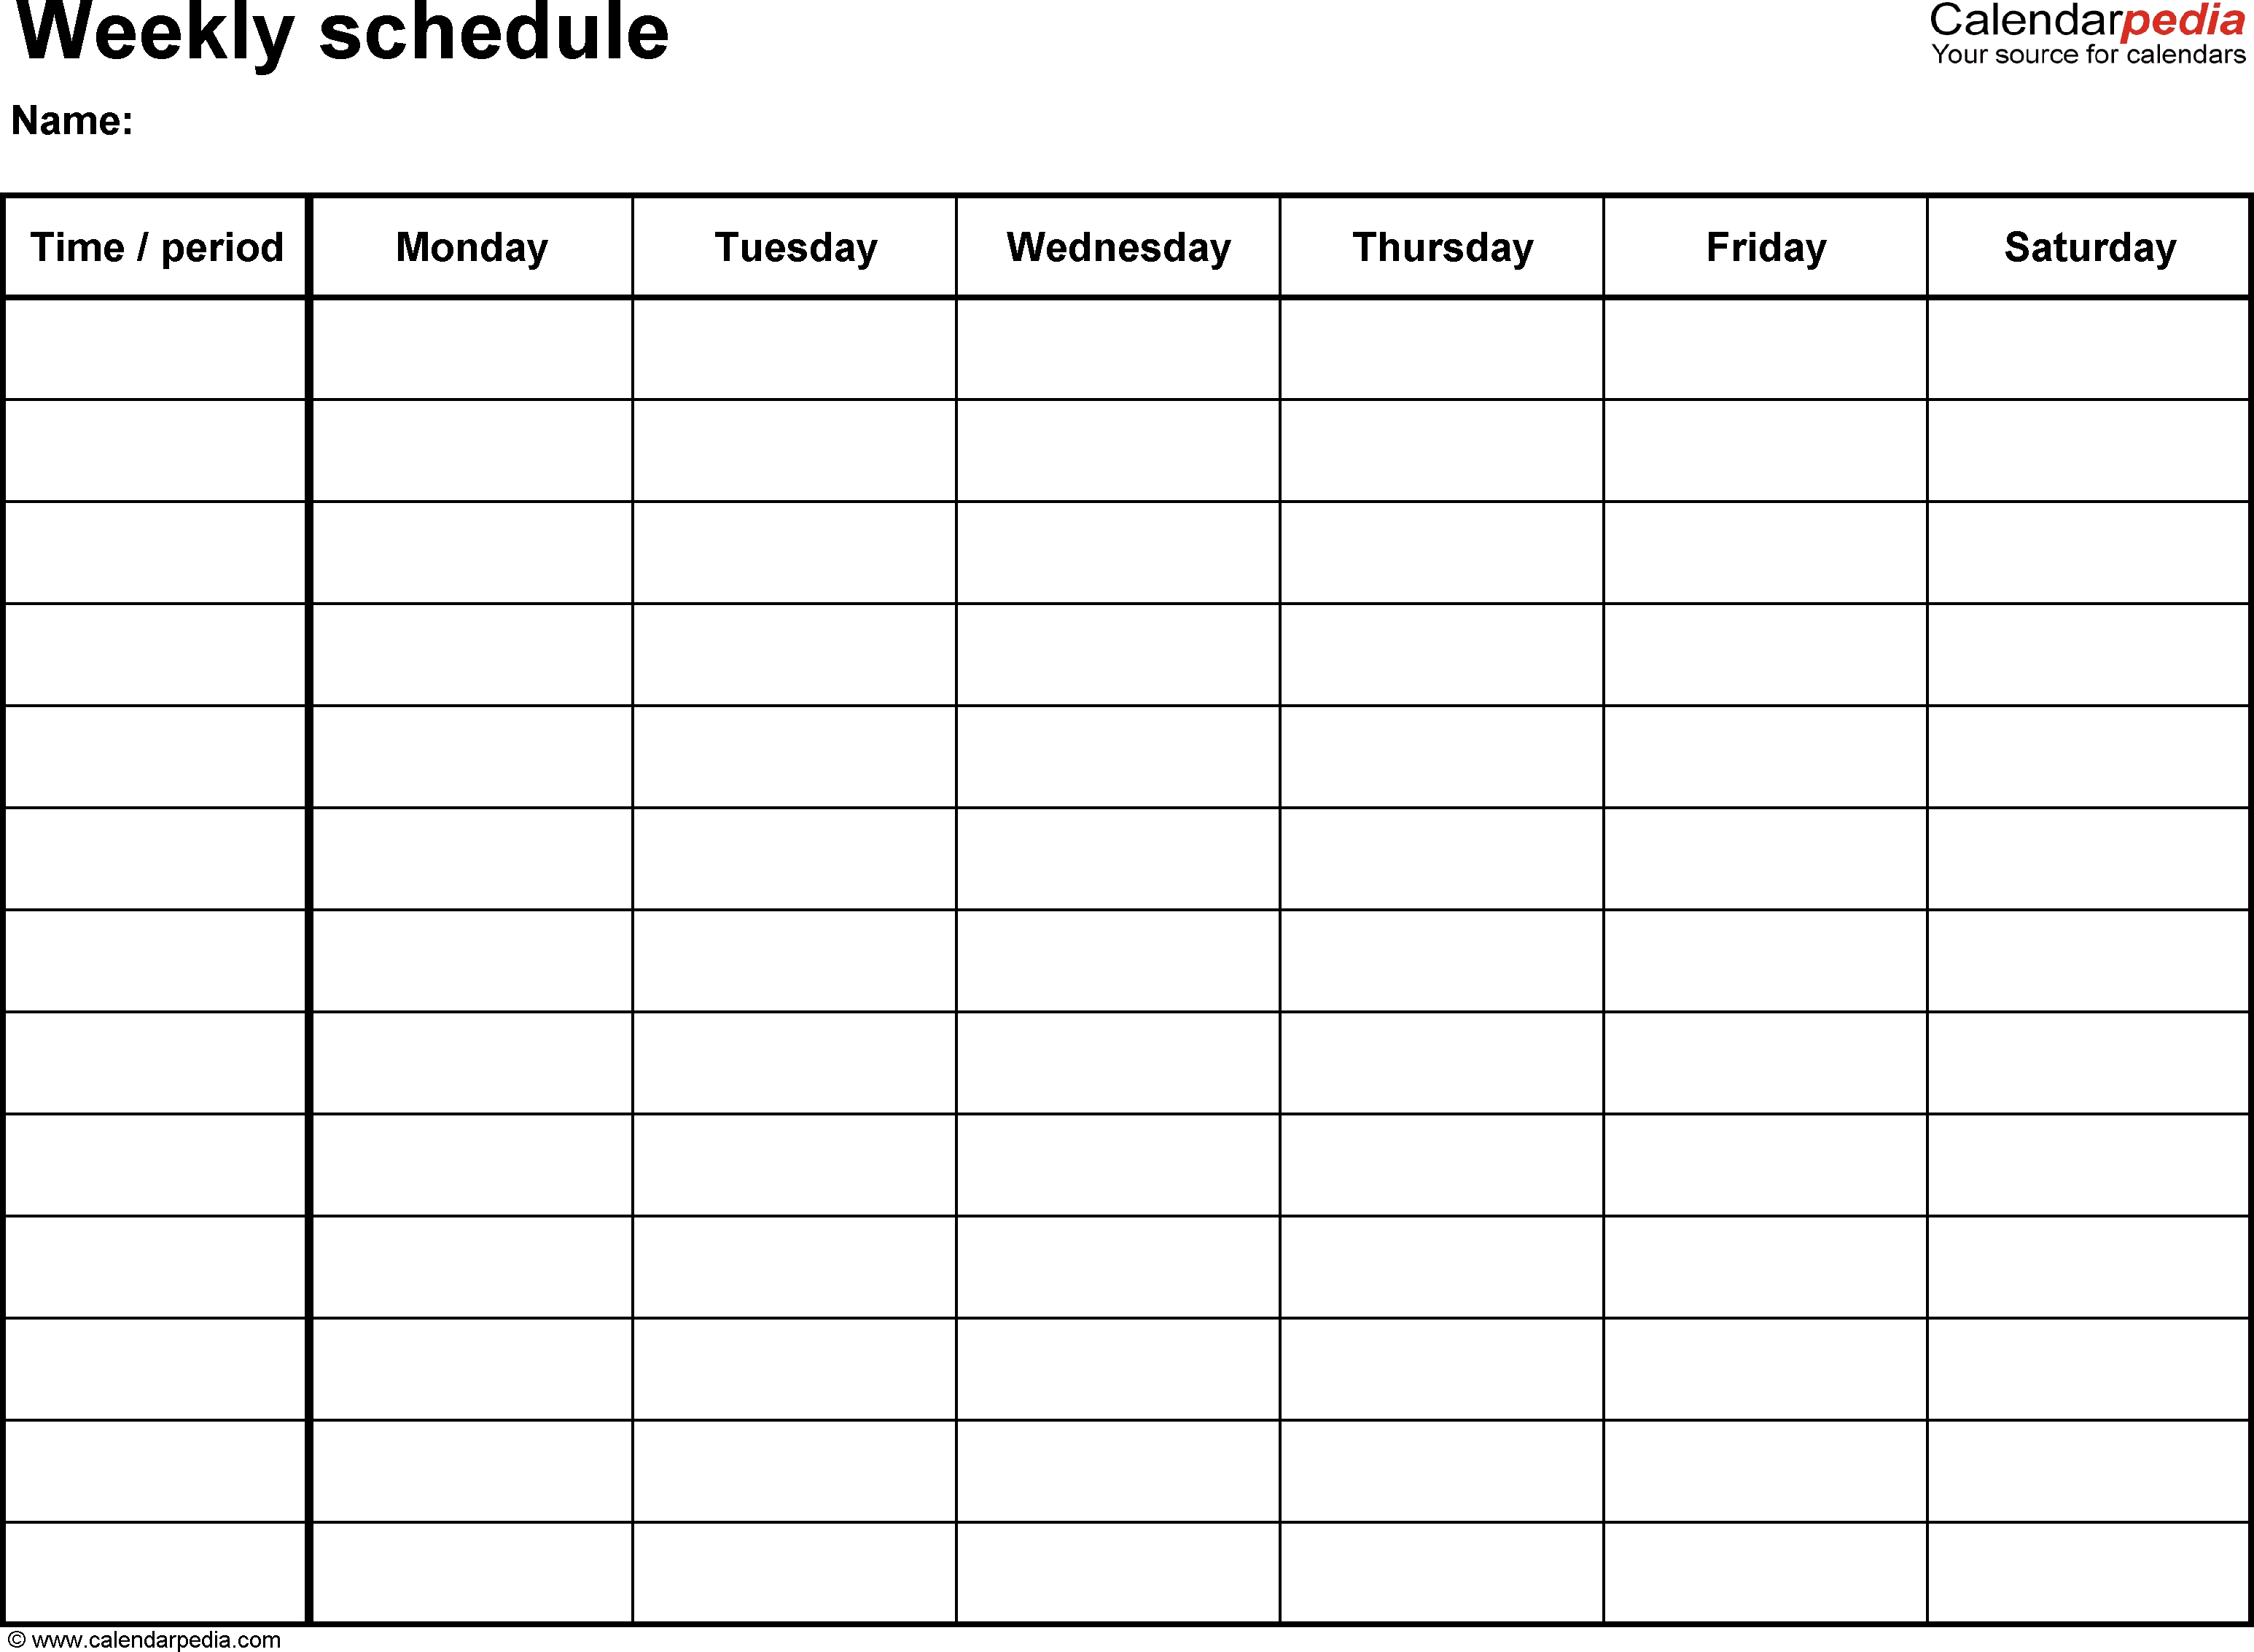 Free Weekly Schedule Templates For Excel - 18 Templates inside Day And Time Calendar Template